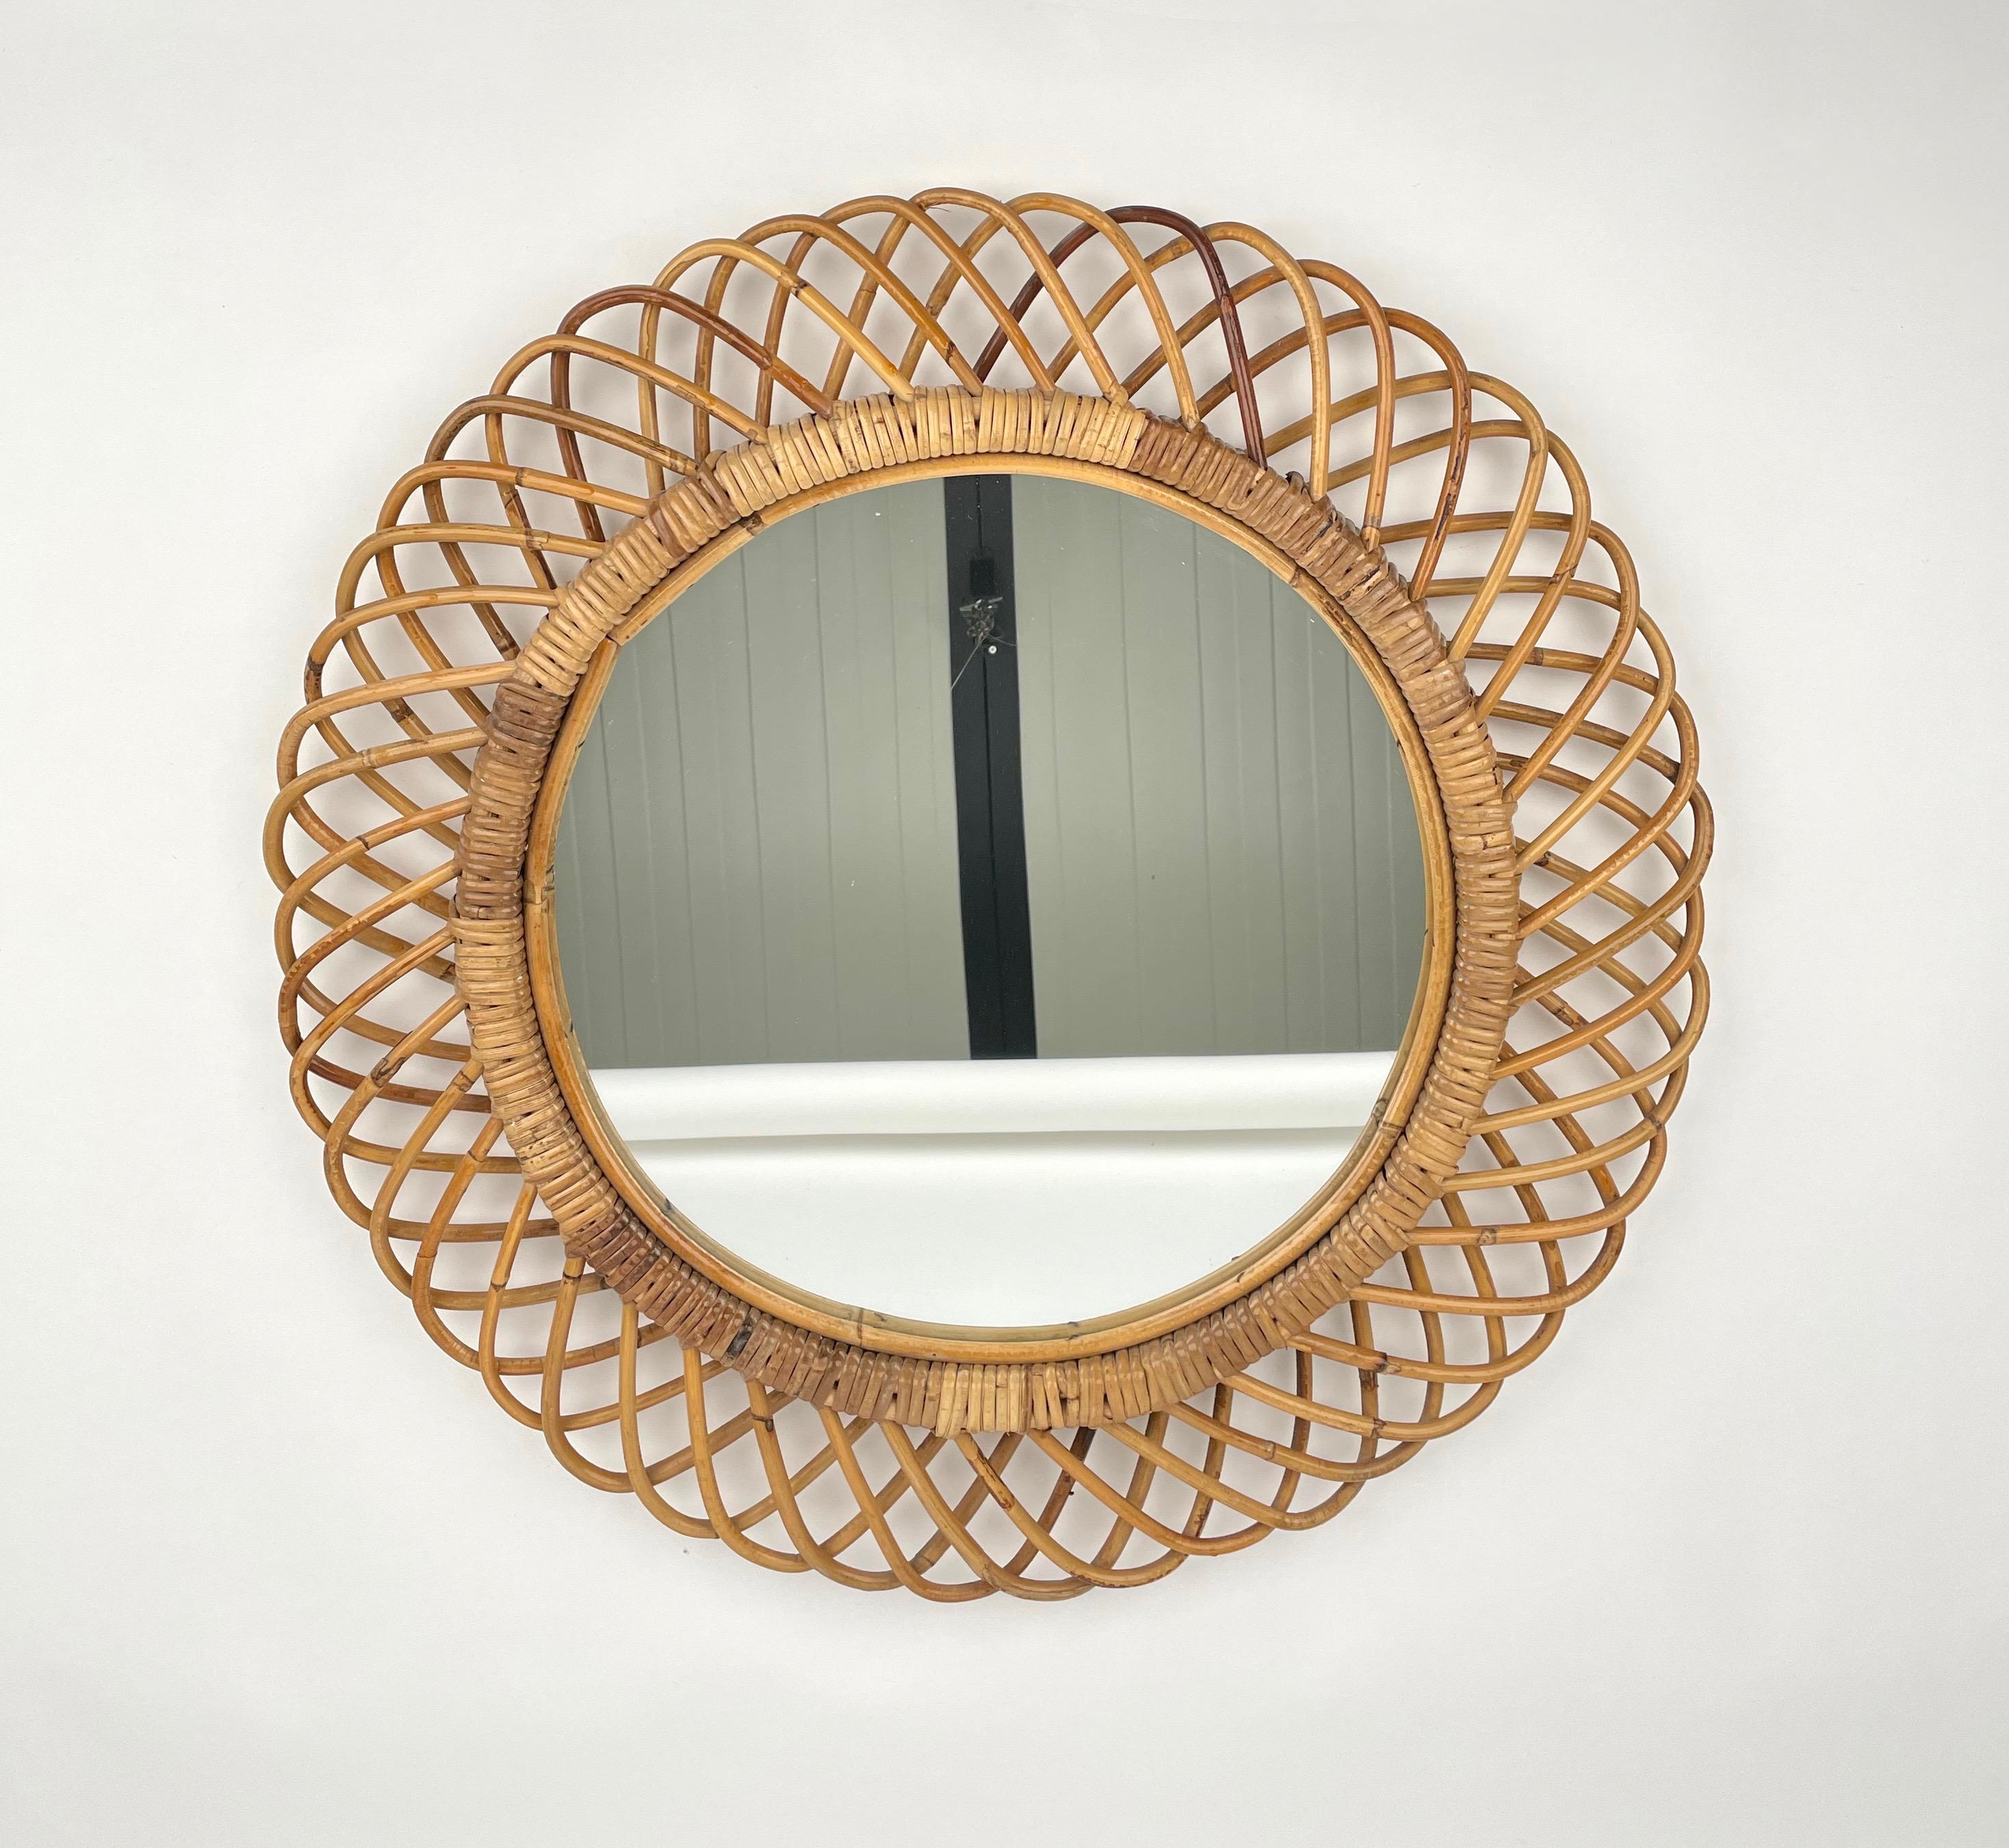 Midcentury Italian Riviera rattan and bamboo round mirror, 1960s.

This wall mirror is unique as it has a curved rattan beam and bamboo double frame, a solid internal one and an external one make of geometric patterns.